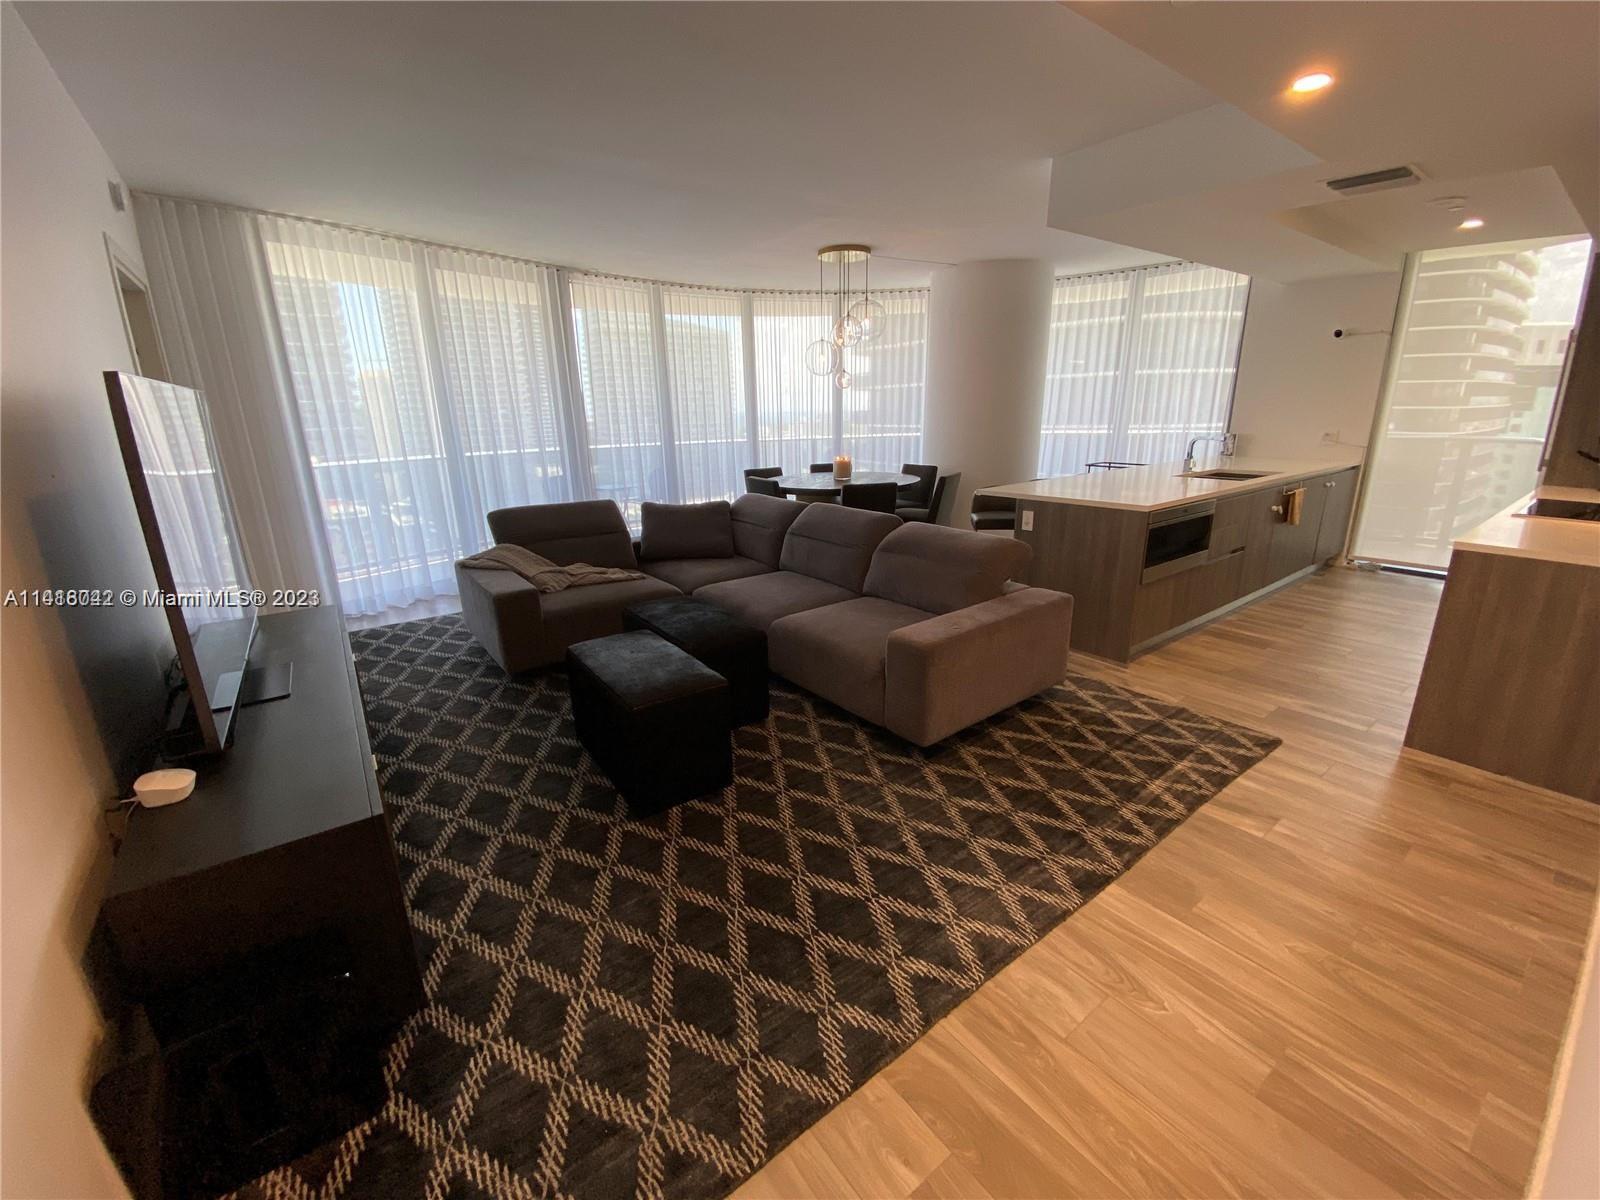 Spectacular apartment in SLS LUX Brickell. Enjoy this exceptional fully furnished apartment and the comforts of a luxury building in the best location in Miami. Shops and restaurants across the street at Brickell City Centre. Publix supermarket 2 minutes walk. And everything you need is walking distance.